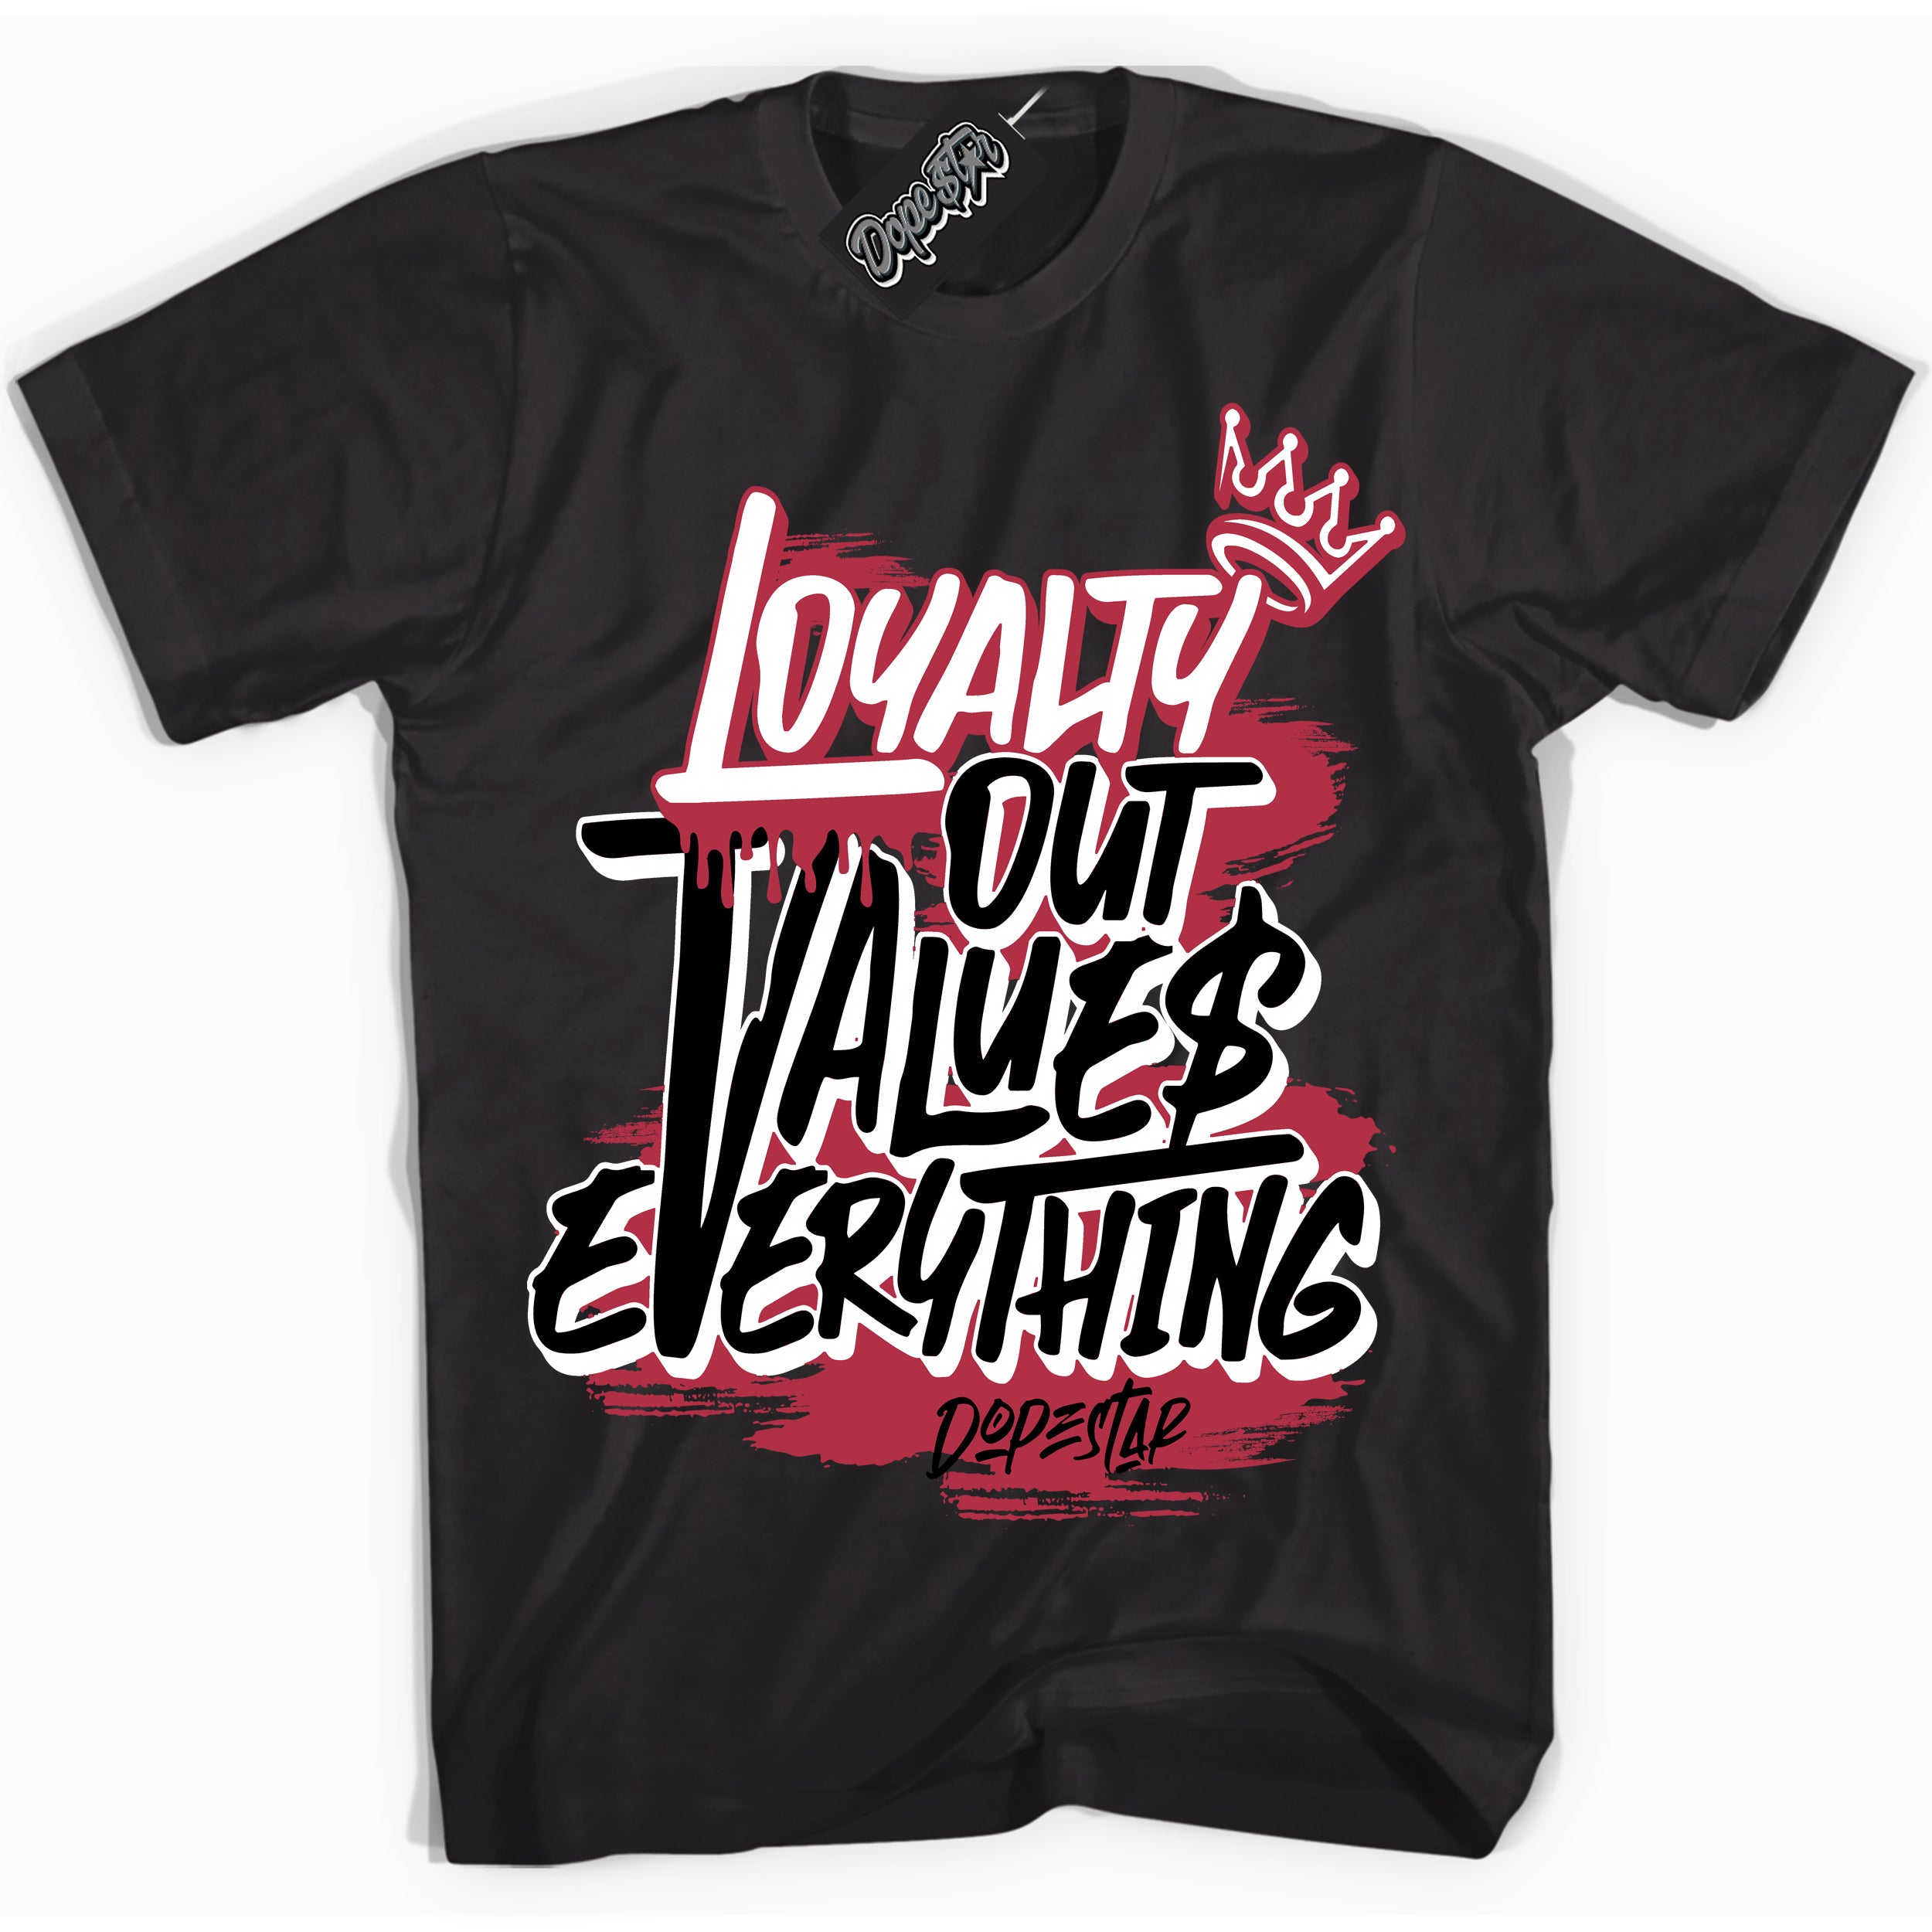 Cool Black Shirt with “ Loyalty Out Values Everything” design that perfectly matches FlyEase Black White Fire Red 1s Sneakers.